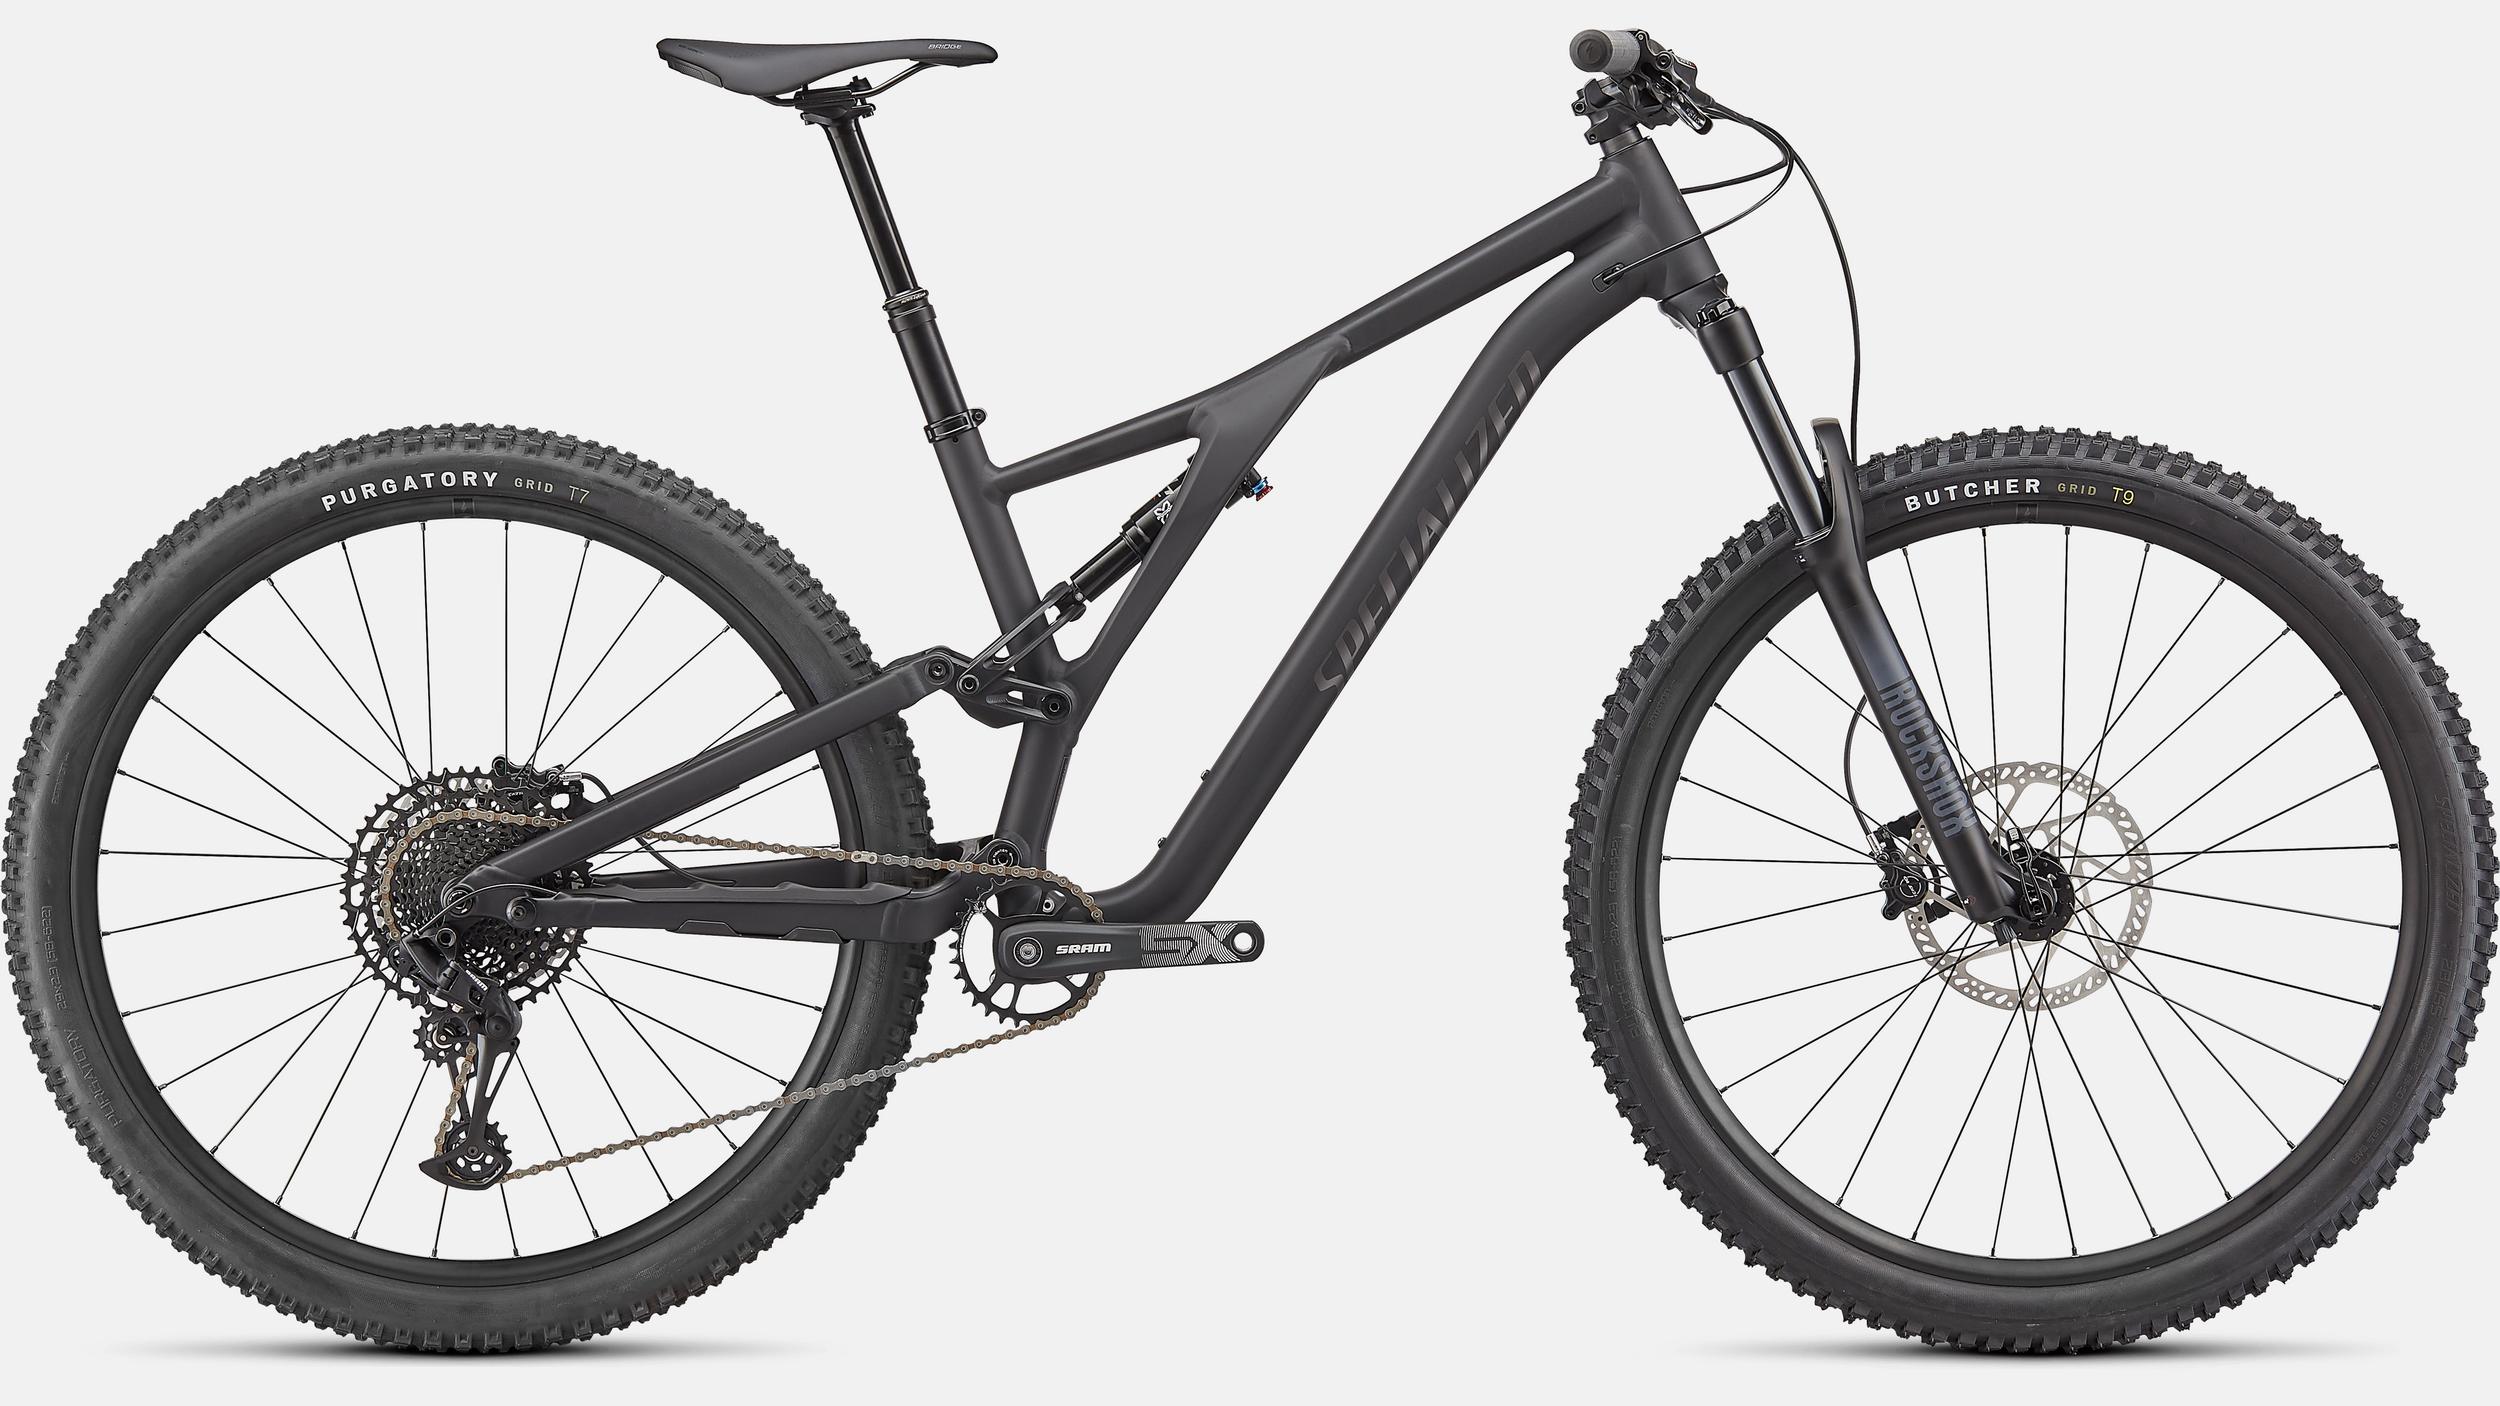 Paint for 2022 Specialized Stumpjumper Alloy - Satin Black